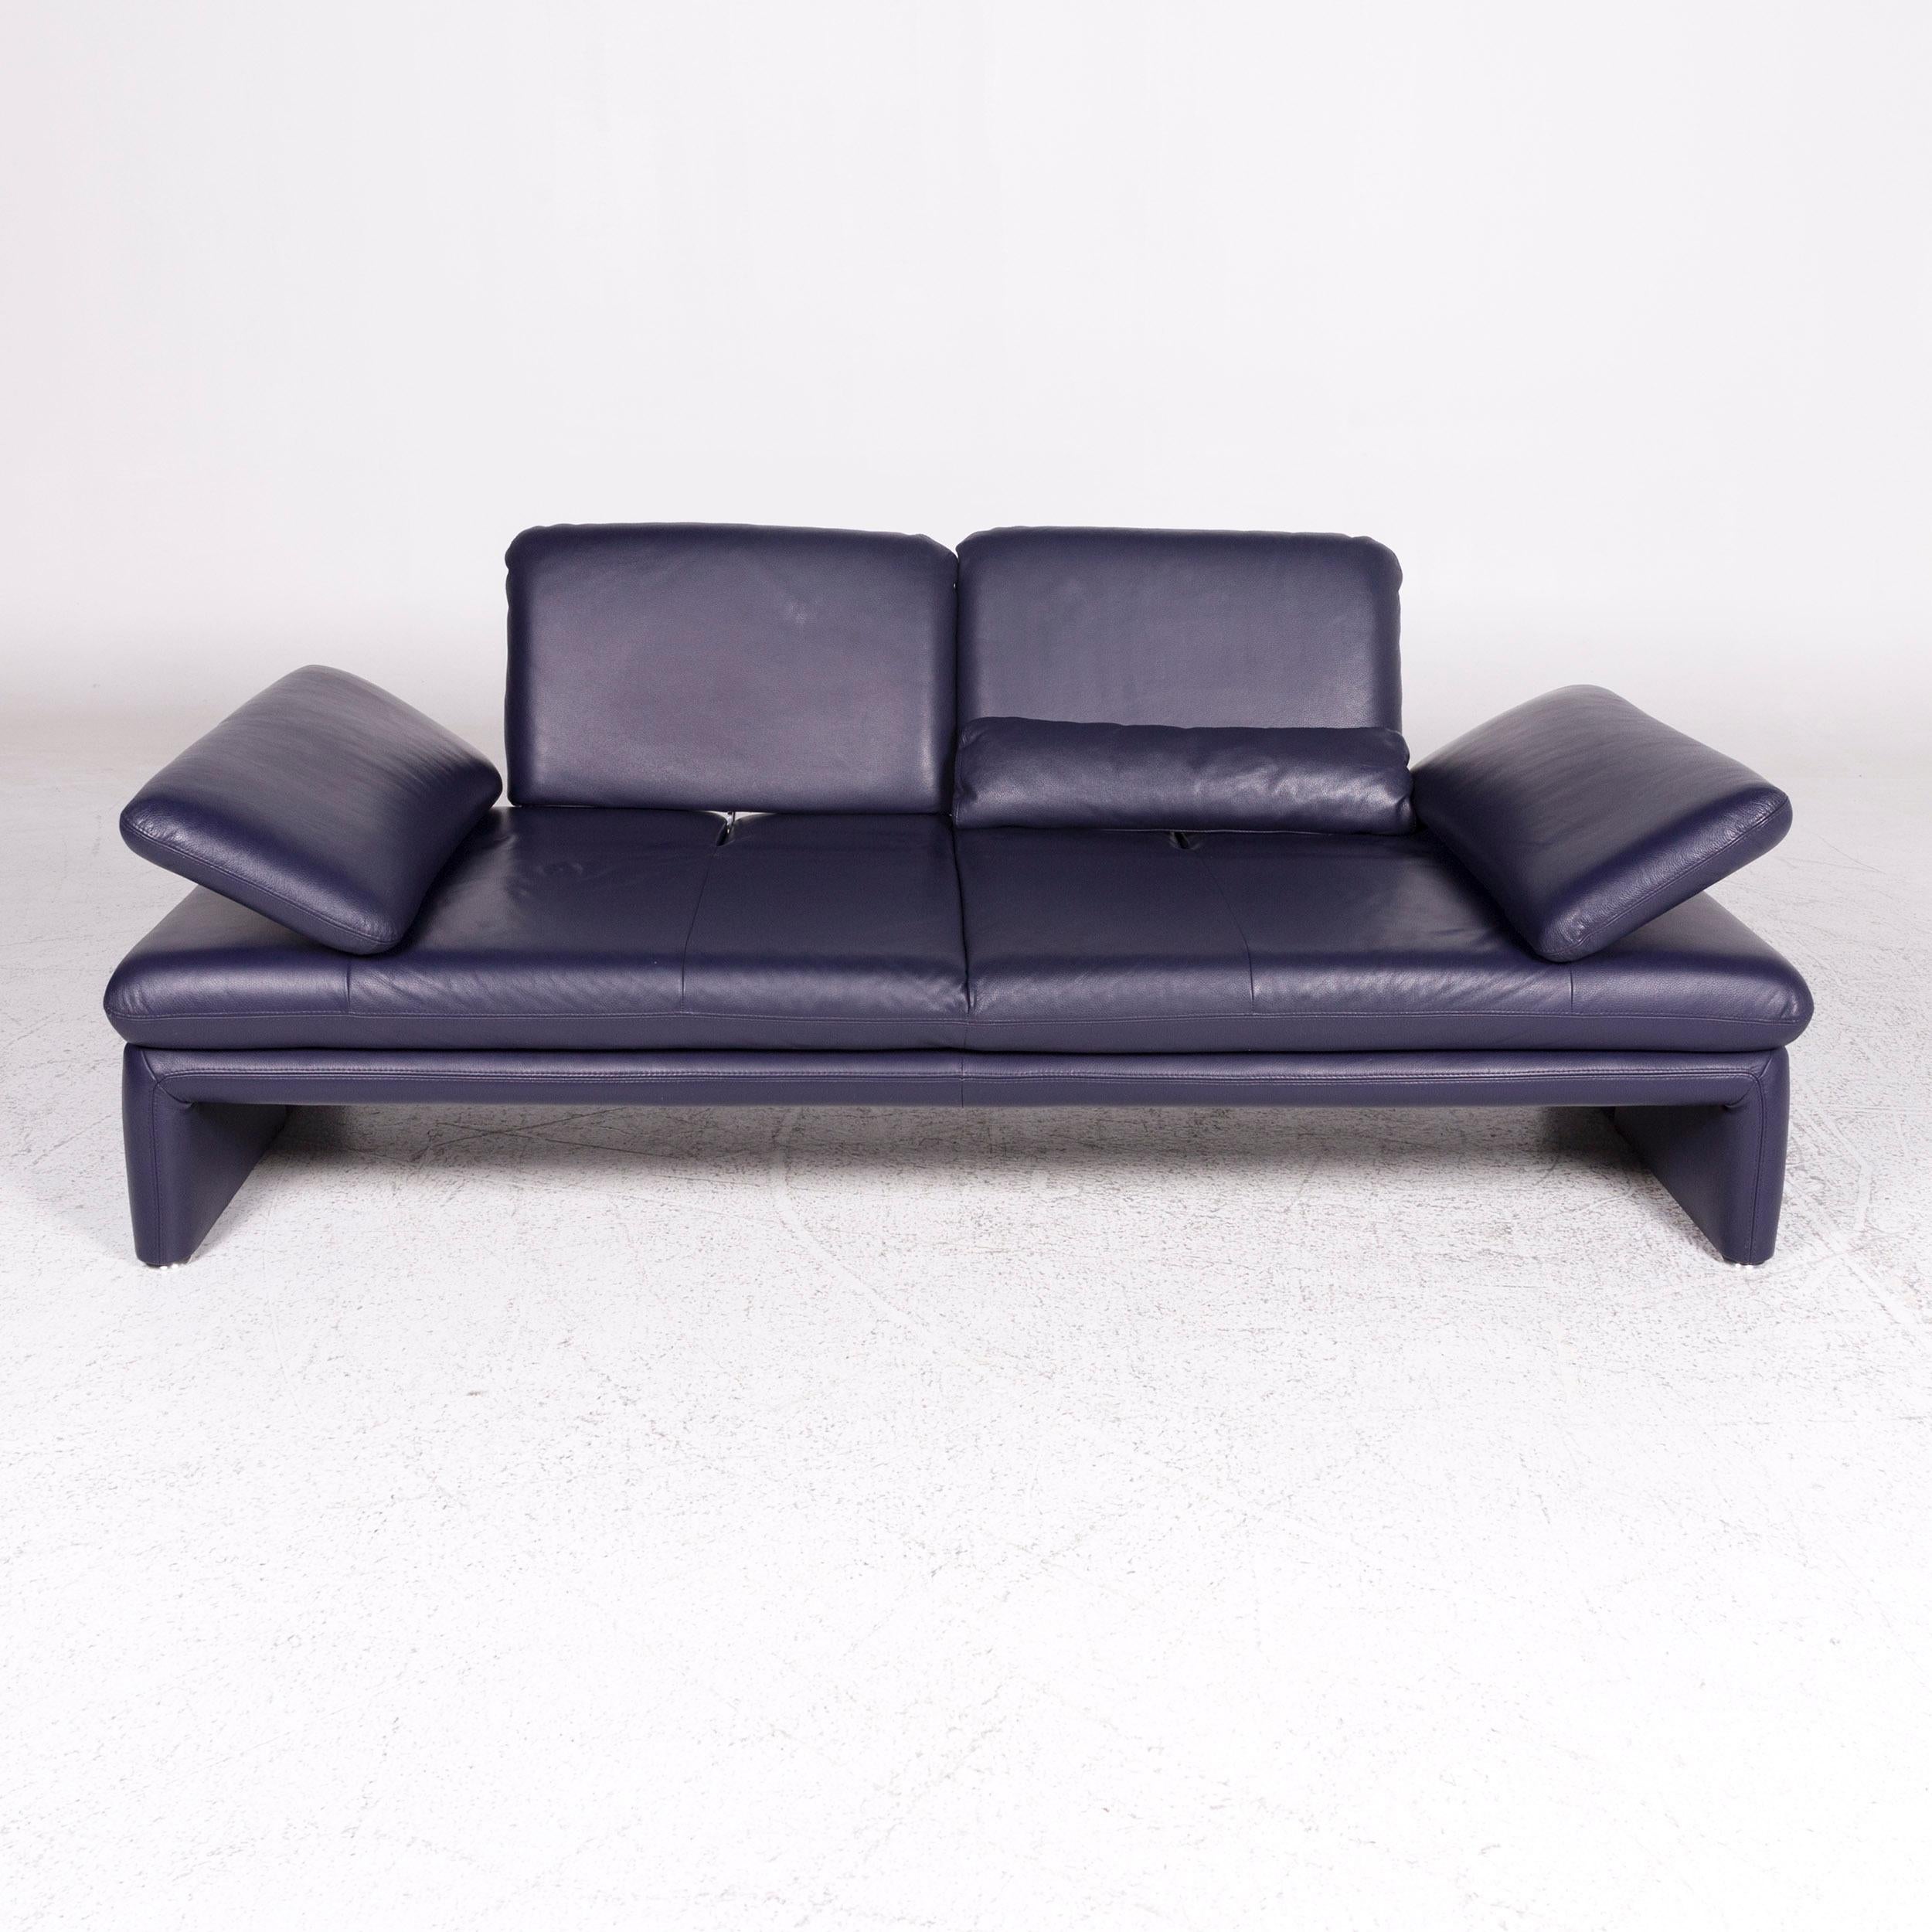 German Willi Schillig Leather Sofa Purple Two-Seat Couch For Sale